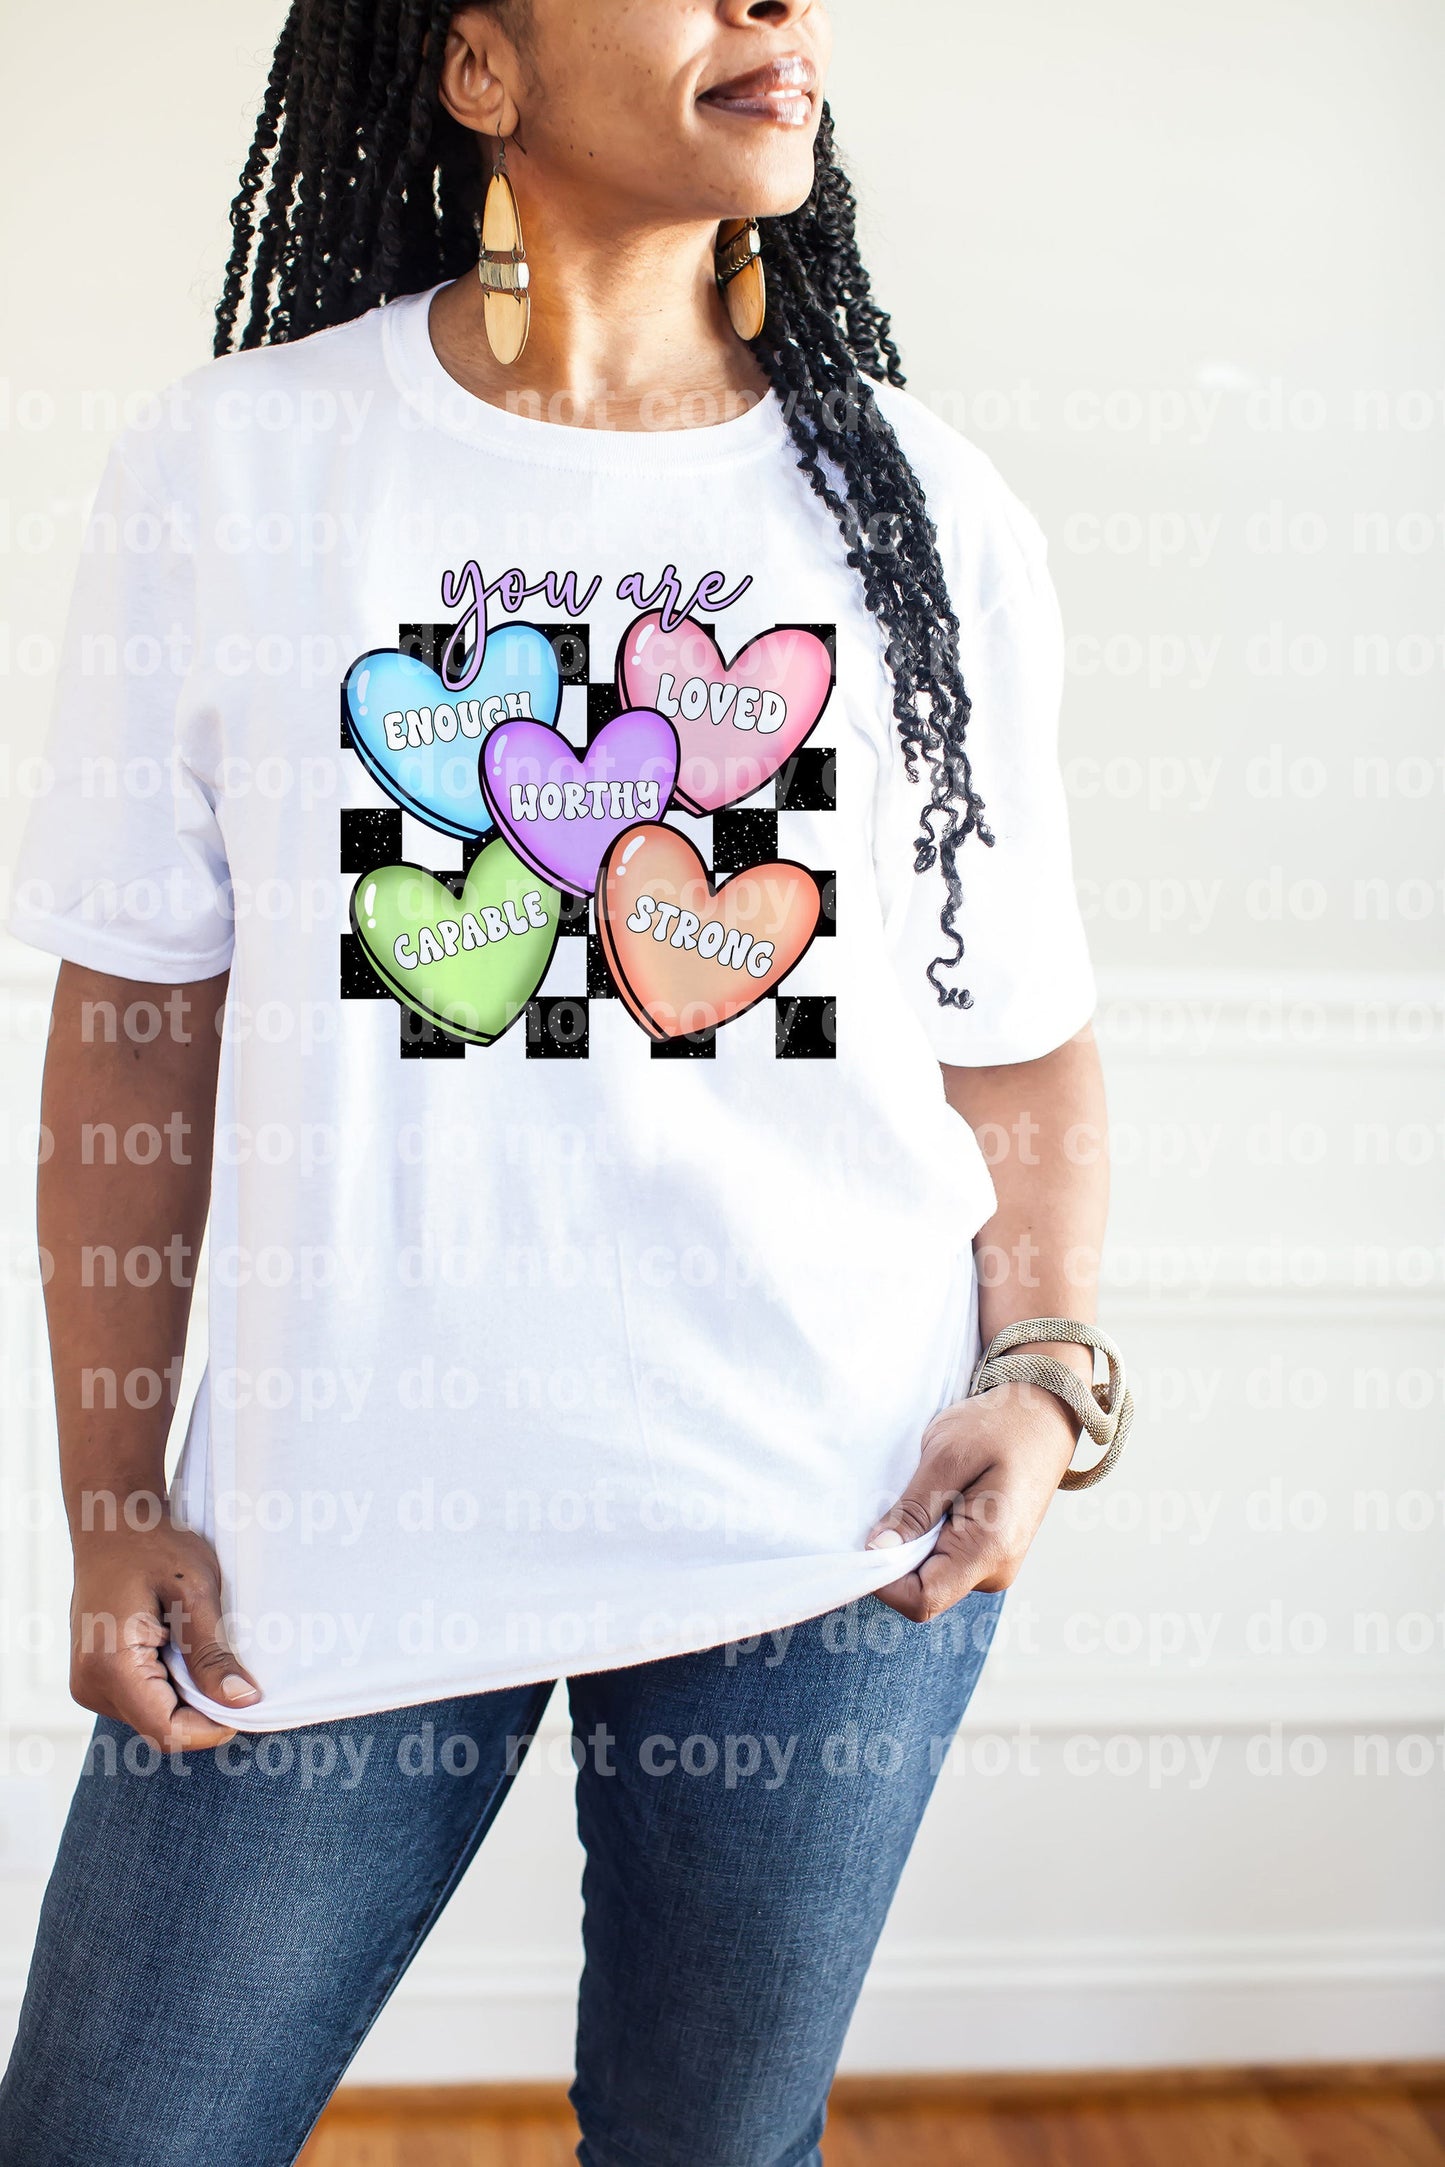 You Are Enough Loved Worthy Capable Strong Hearts Dream Print or Sublimation Print